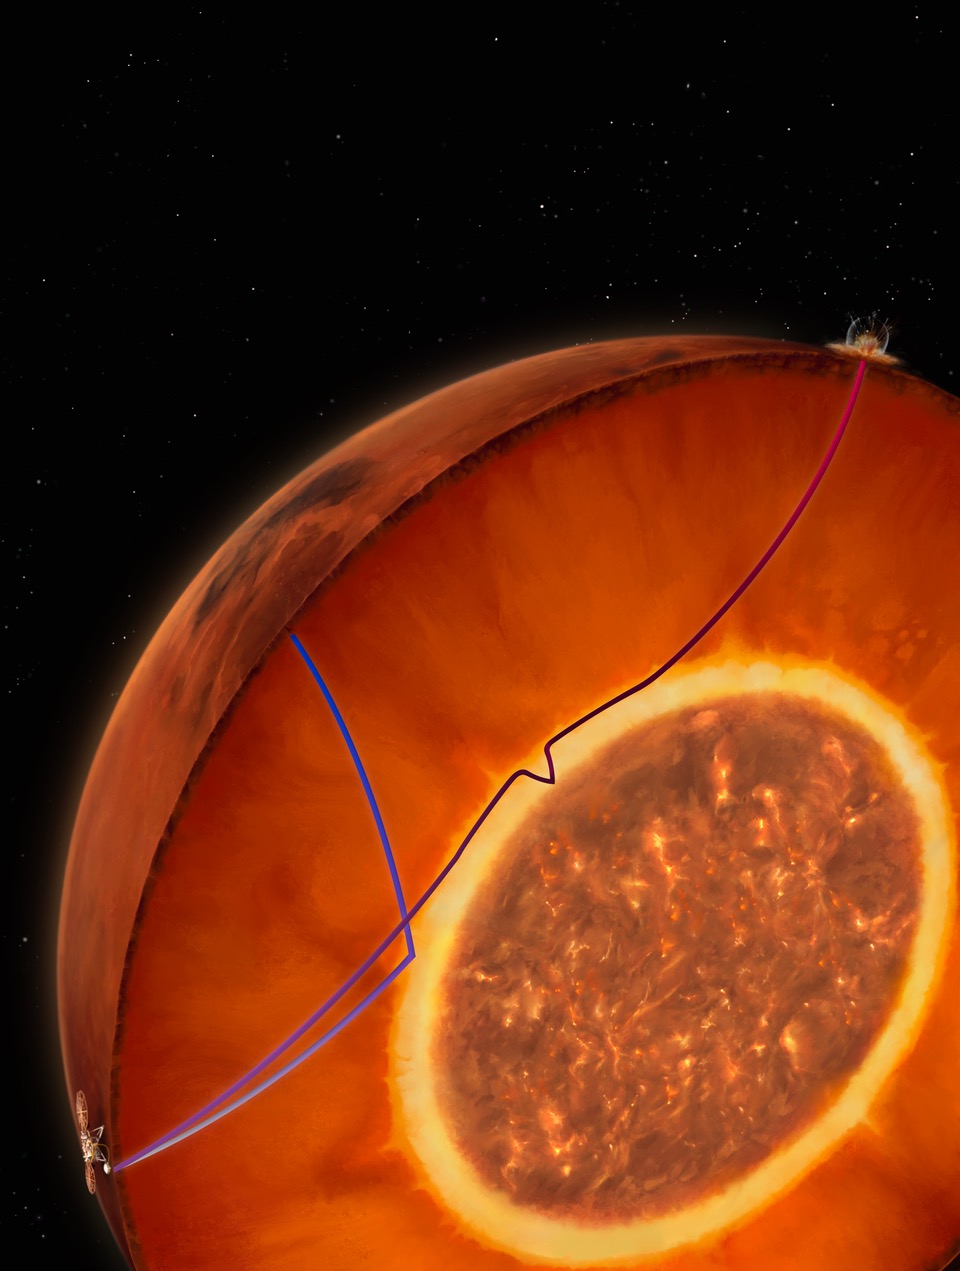 An artist’s depiction of the meteorite impact, the Insight lander, and the newly discovered layer of molten rock covering Mars' core.